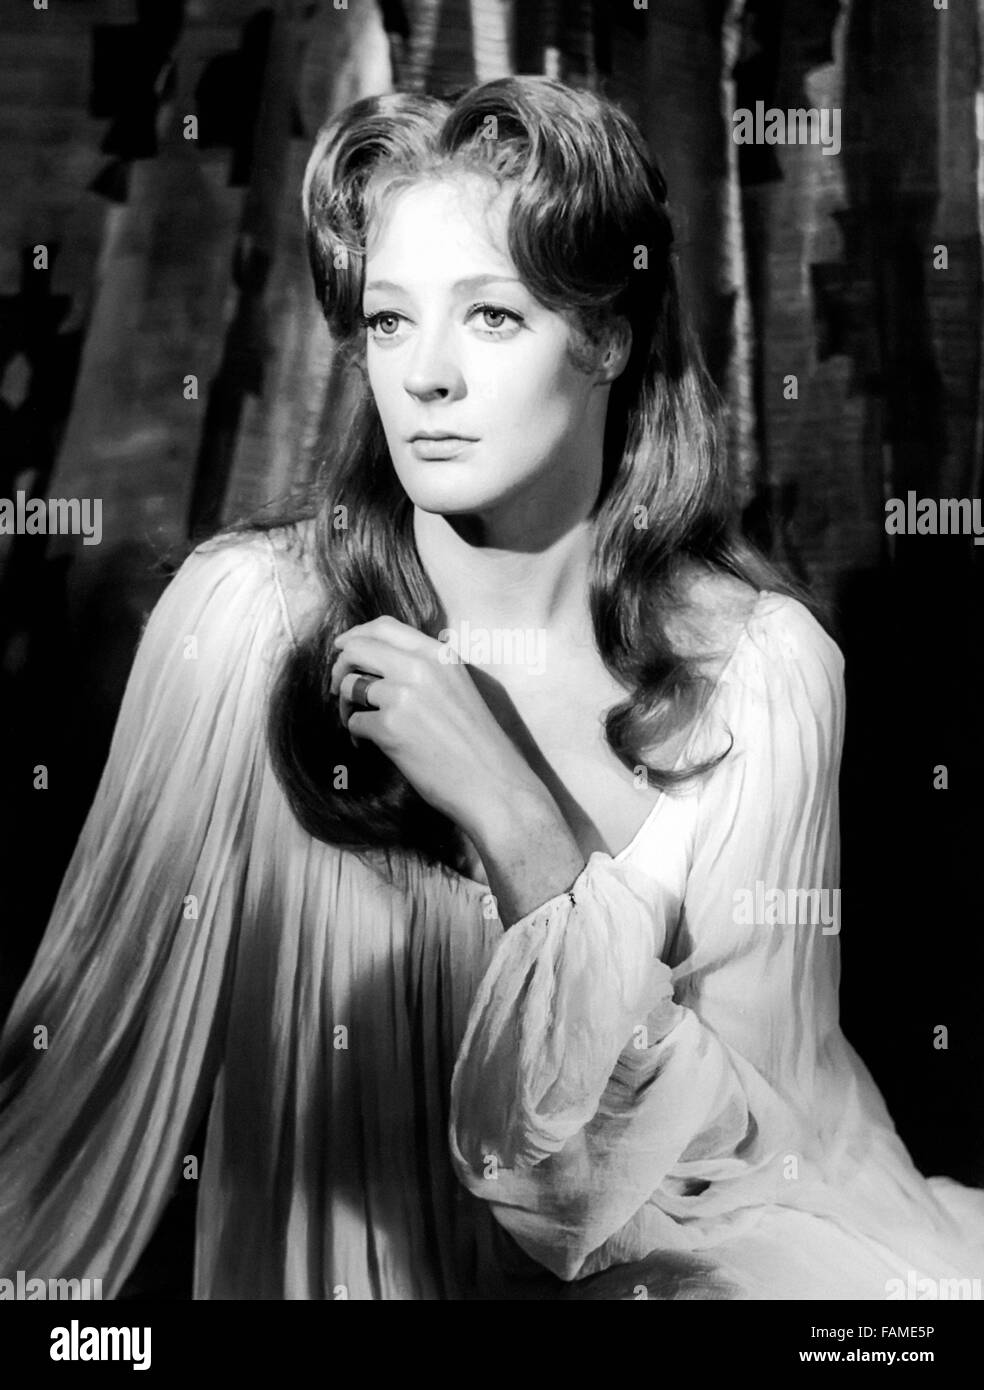 Publicity still from 'Othello' (1965) directed by Stuart Burge showing Maggie Smith as Desdemona,  who she played opposite Laurence Olivier as Othello and received an Oscar nomination for Best Actress in a Supporting Role. Directed by Stuart Burge and also starring Laurence Olivier. Stock Photo